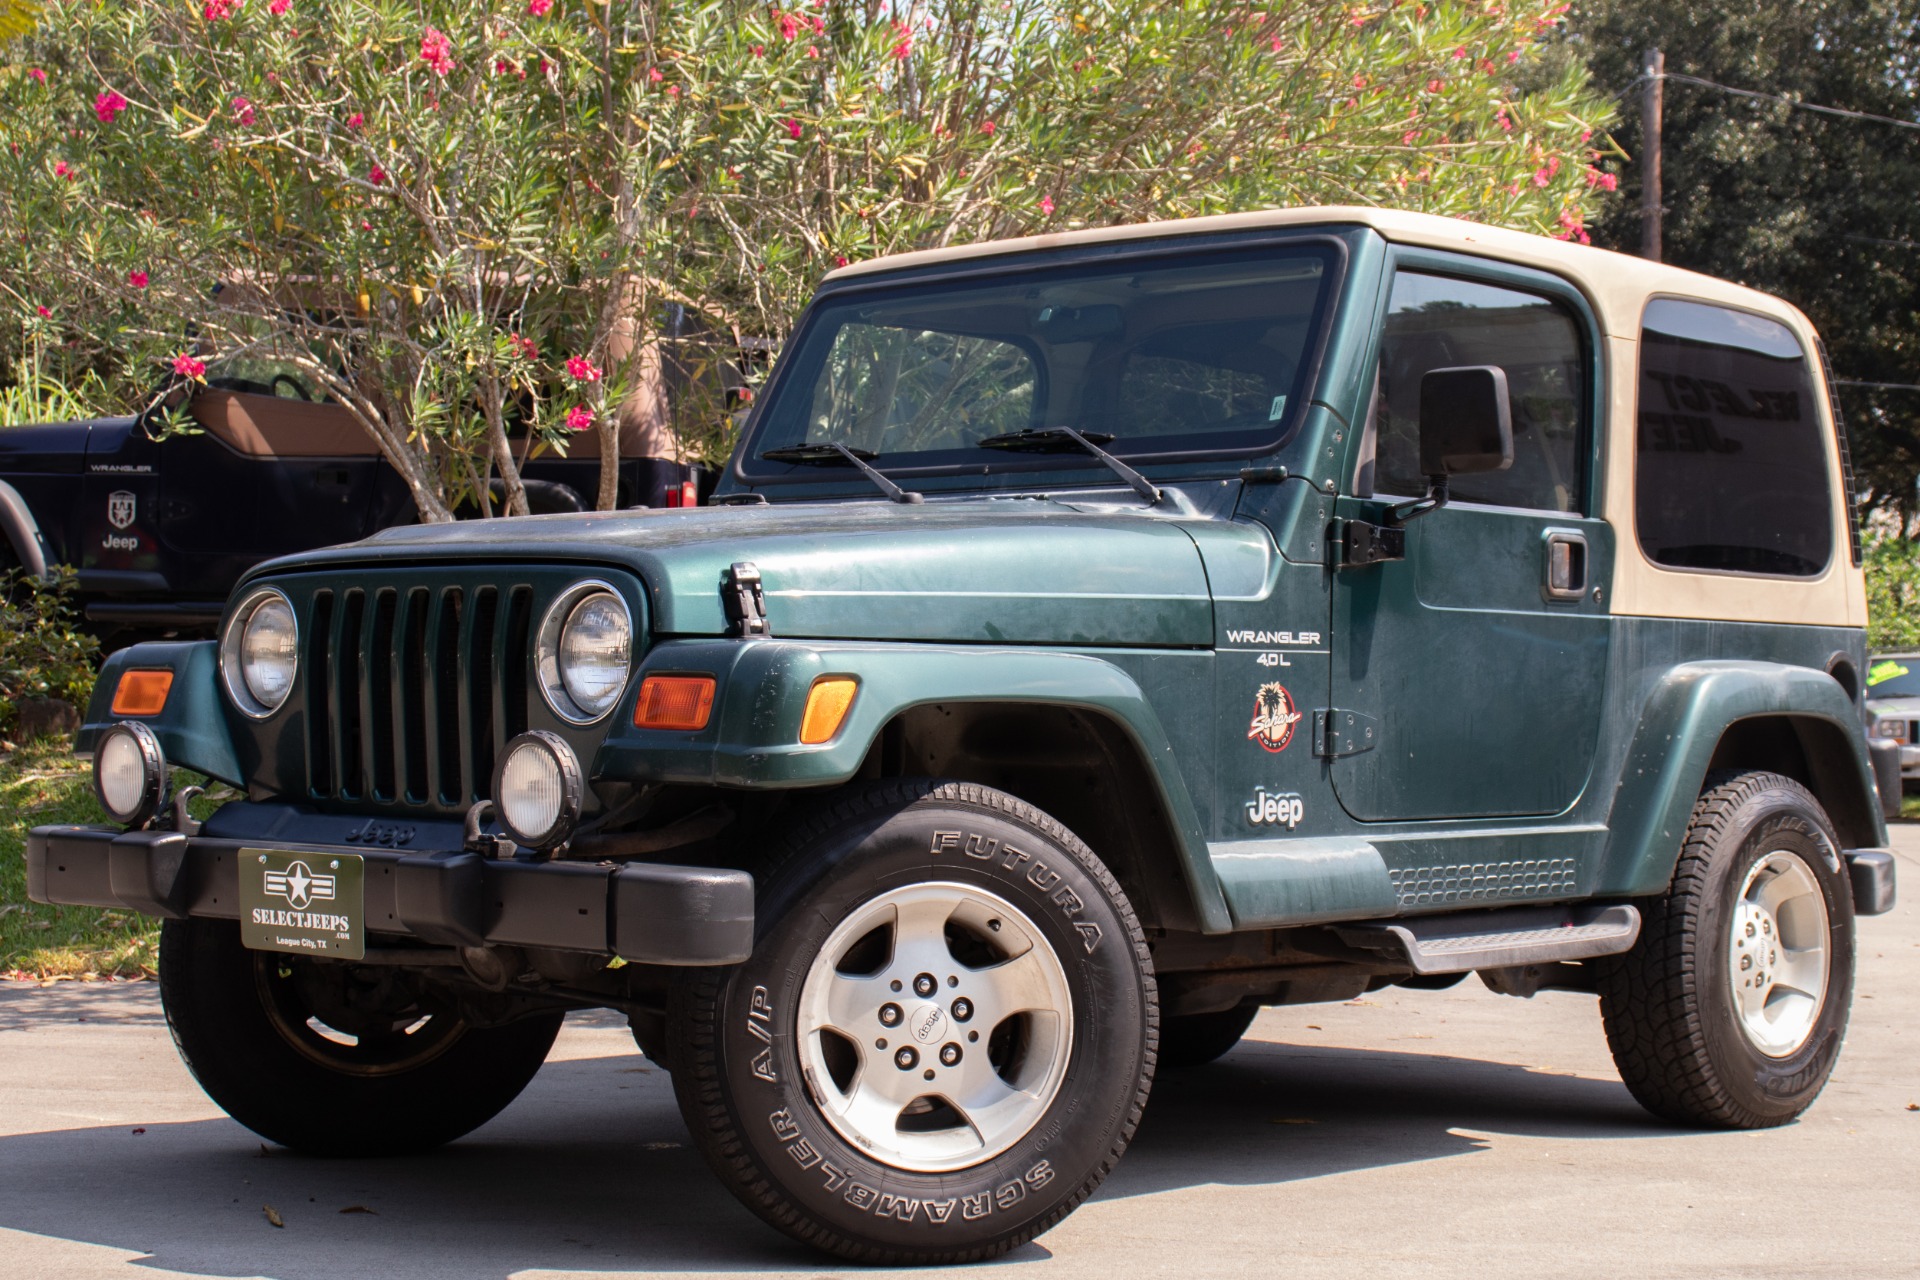 Used 2000 Jeep Wrangler Sahara For Sale (Special Pricing) | Select Jeeps  Inc. Stock #735638